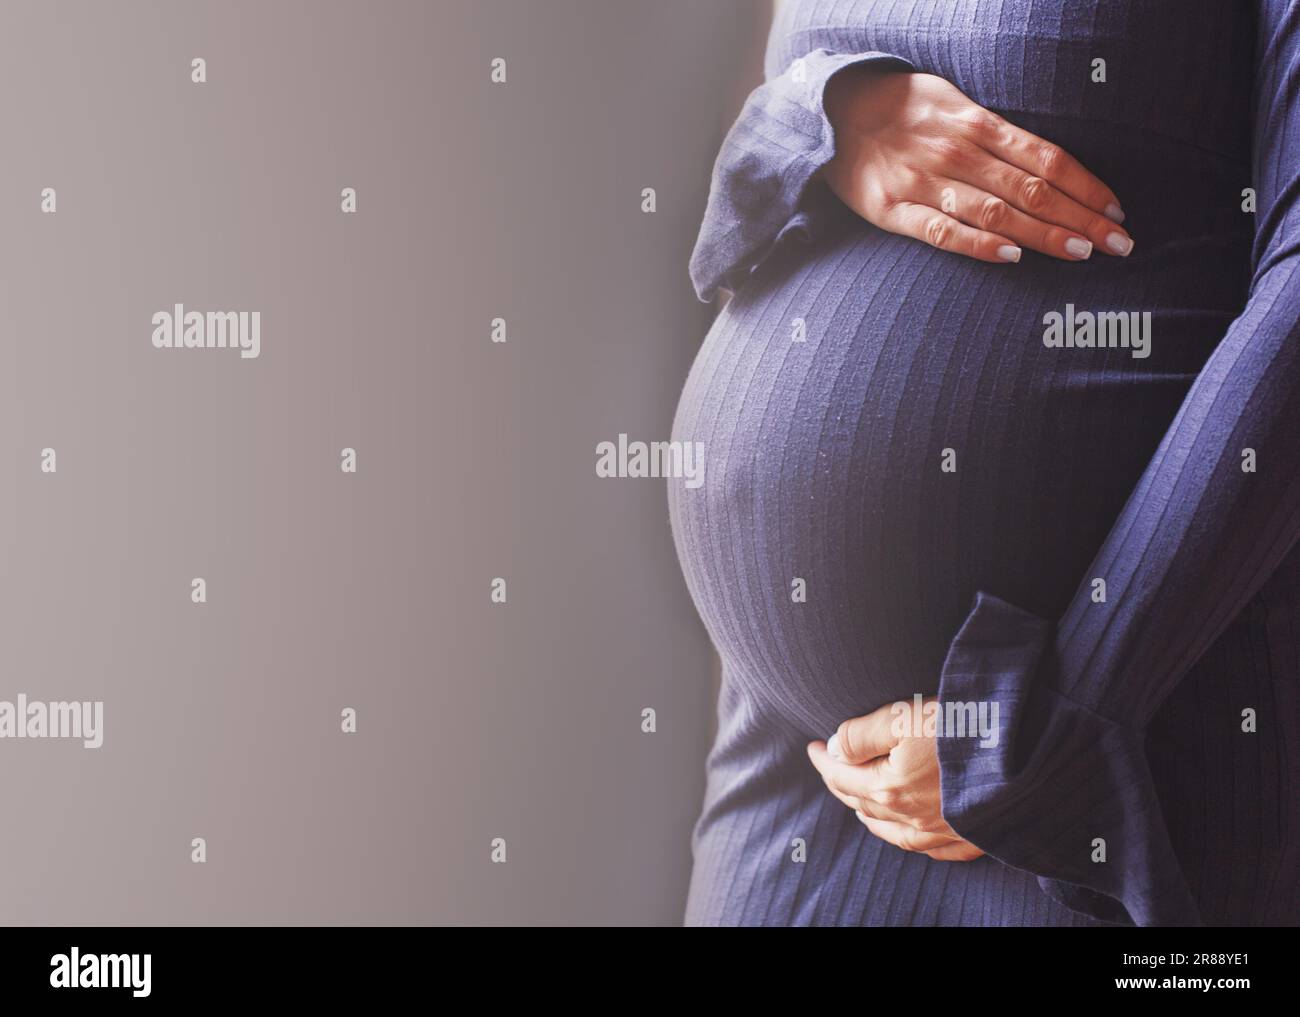 pregnant woman's belly closeup. Girls hands hugging her belly in blue background. Concept of maternal health. Stock Photo